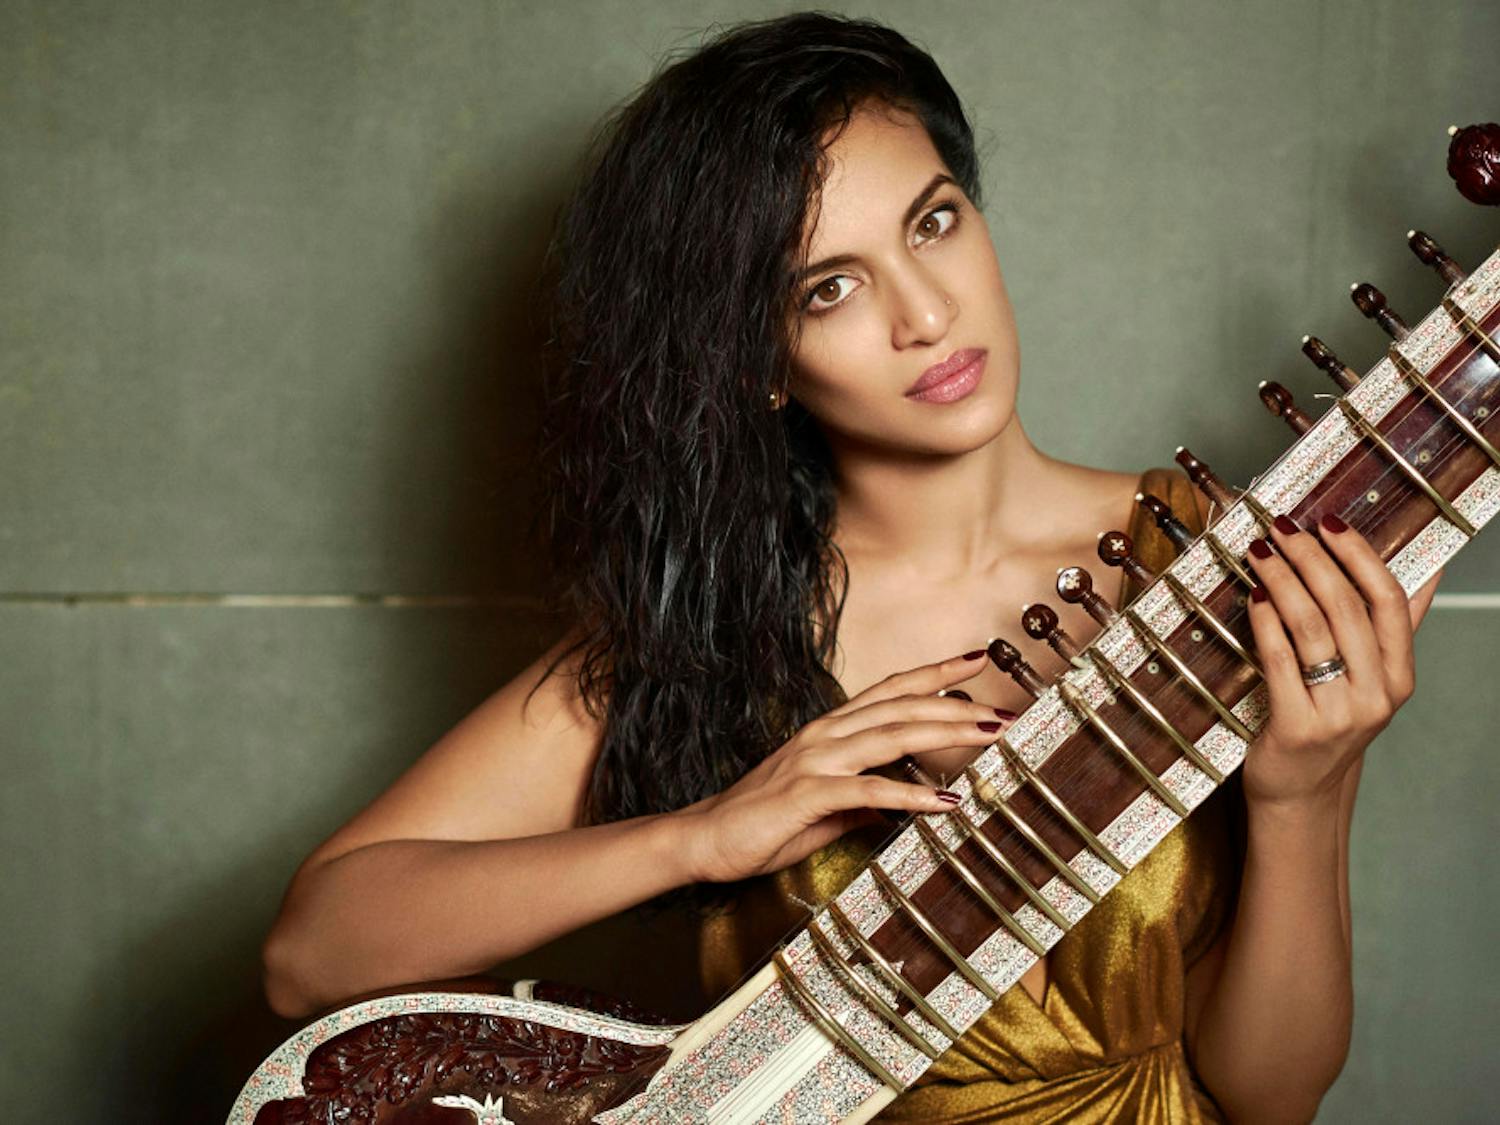 Anoushka Shankar, a Grammy-nominated sitar player, will take the Phillips Center stage Monday.